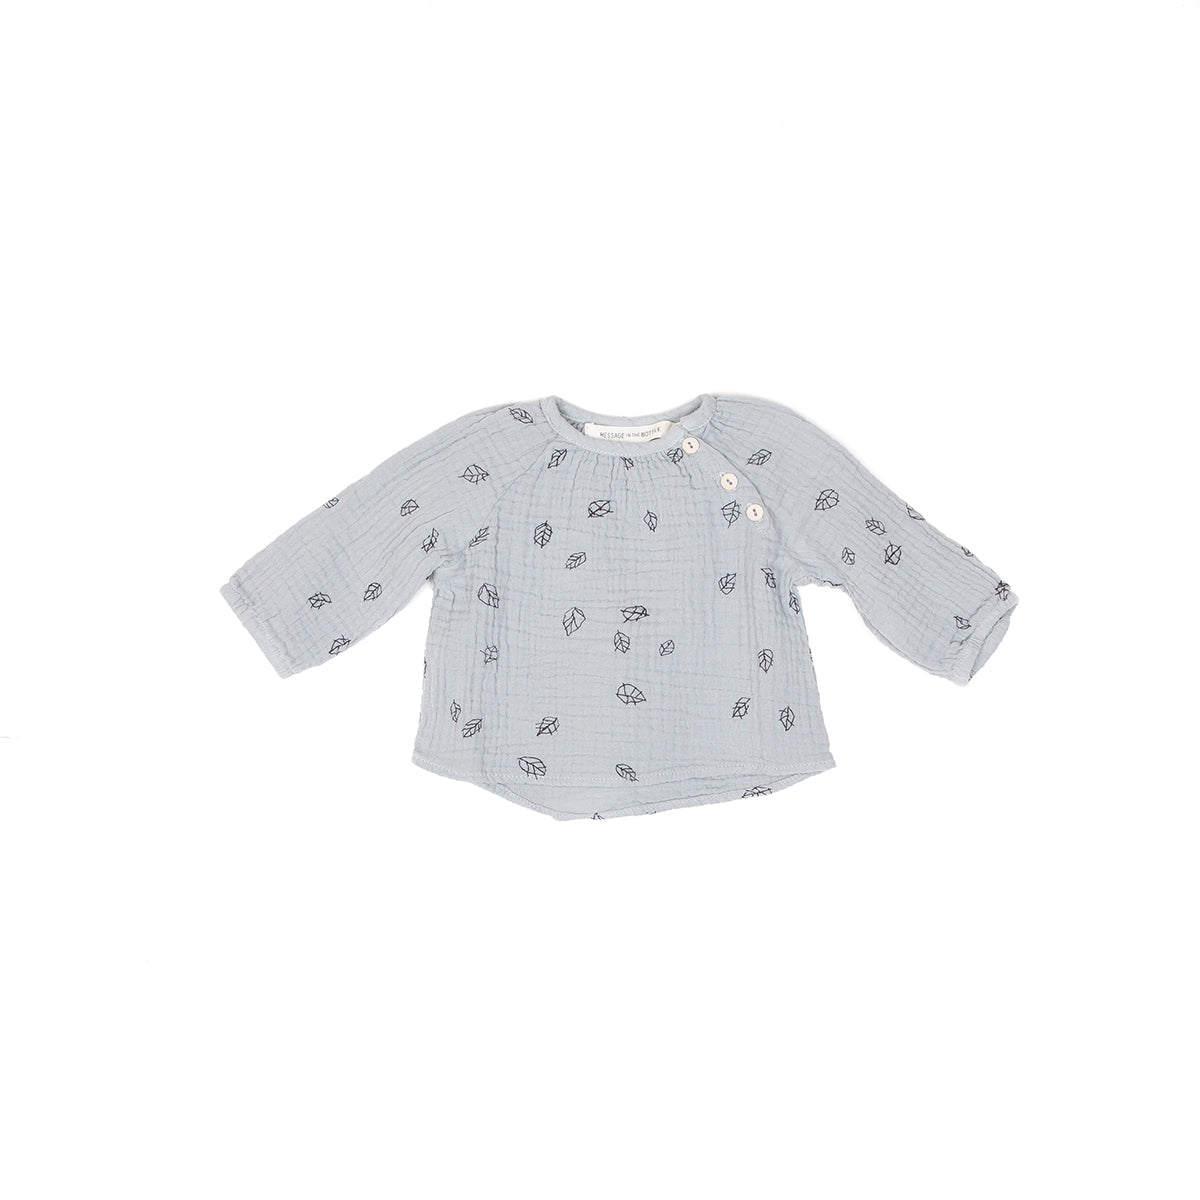 LS GRL BLOUSE W BUTTONS, STONE LEAVES - Cemarose Children's Fashion Boutique